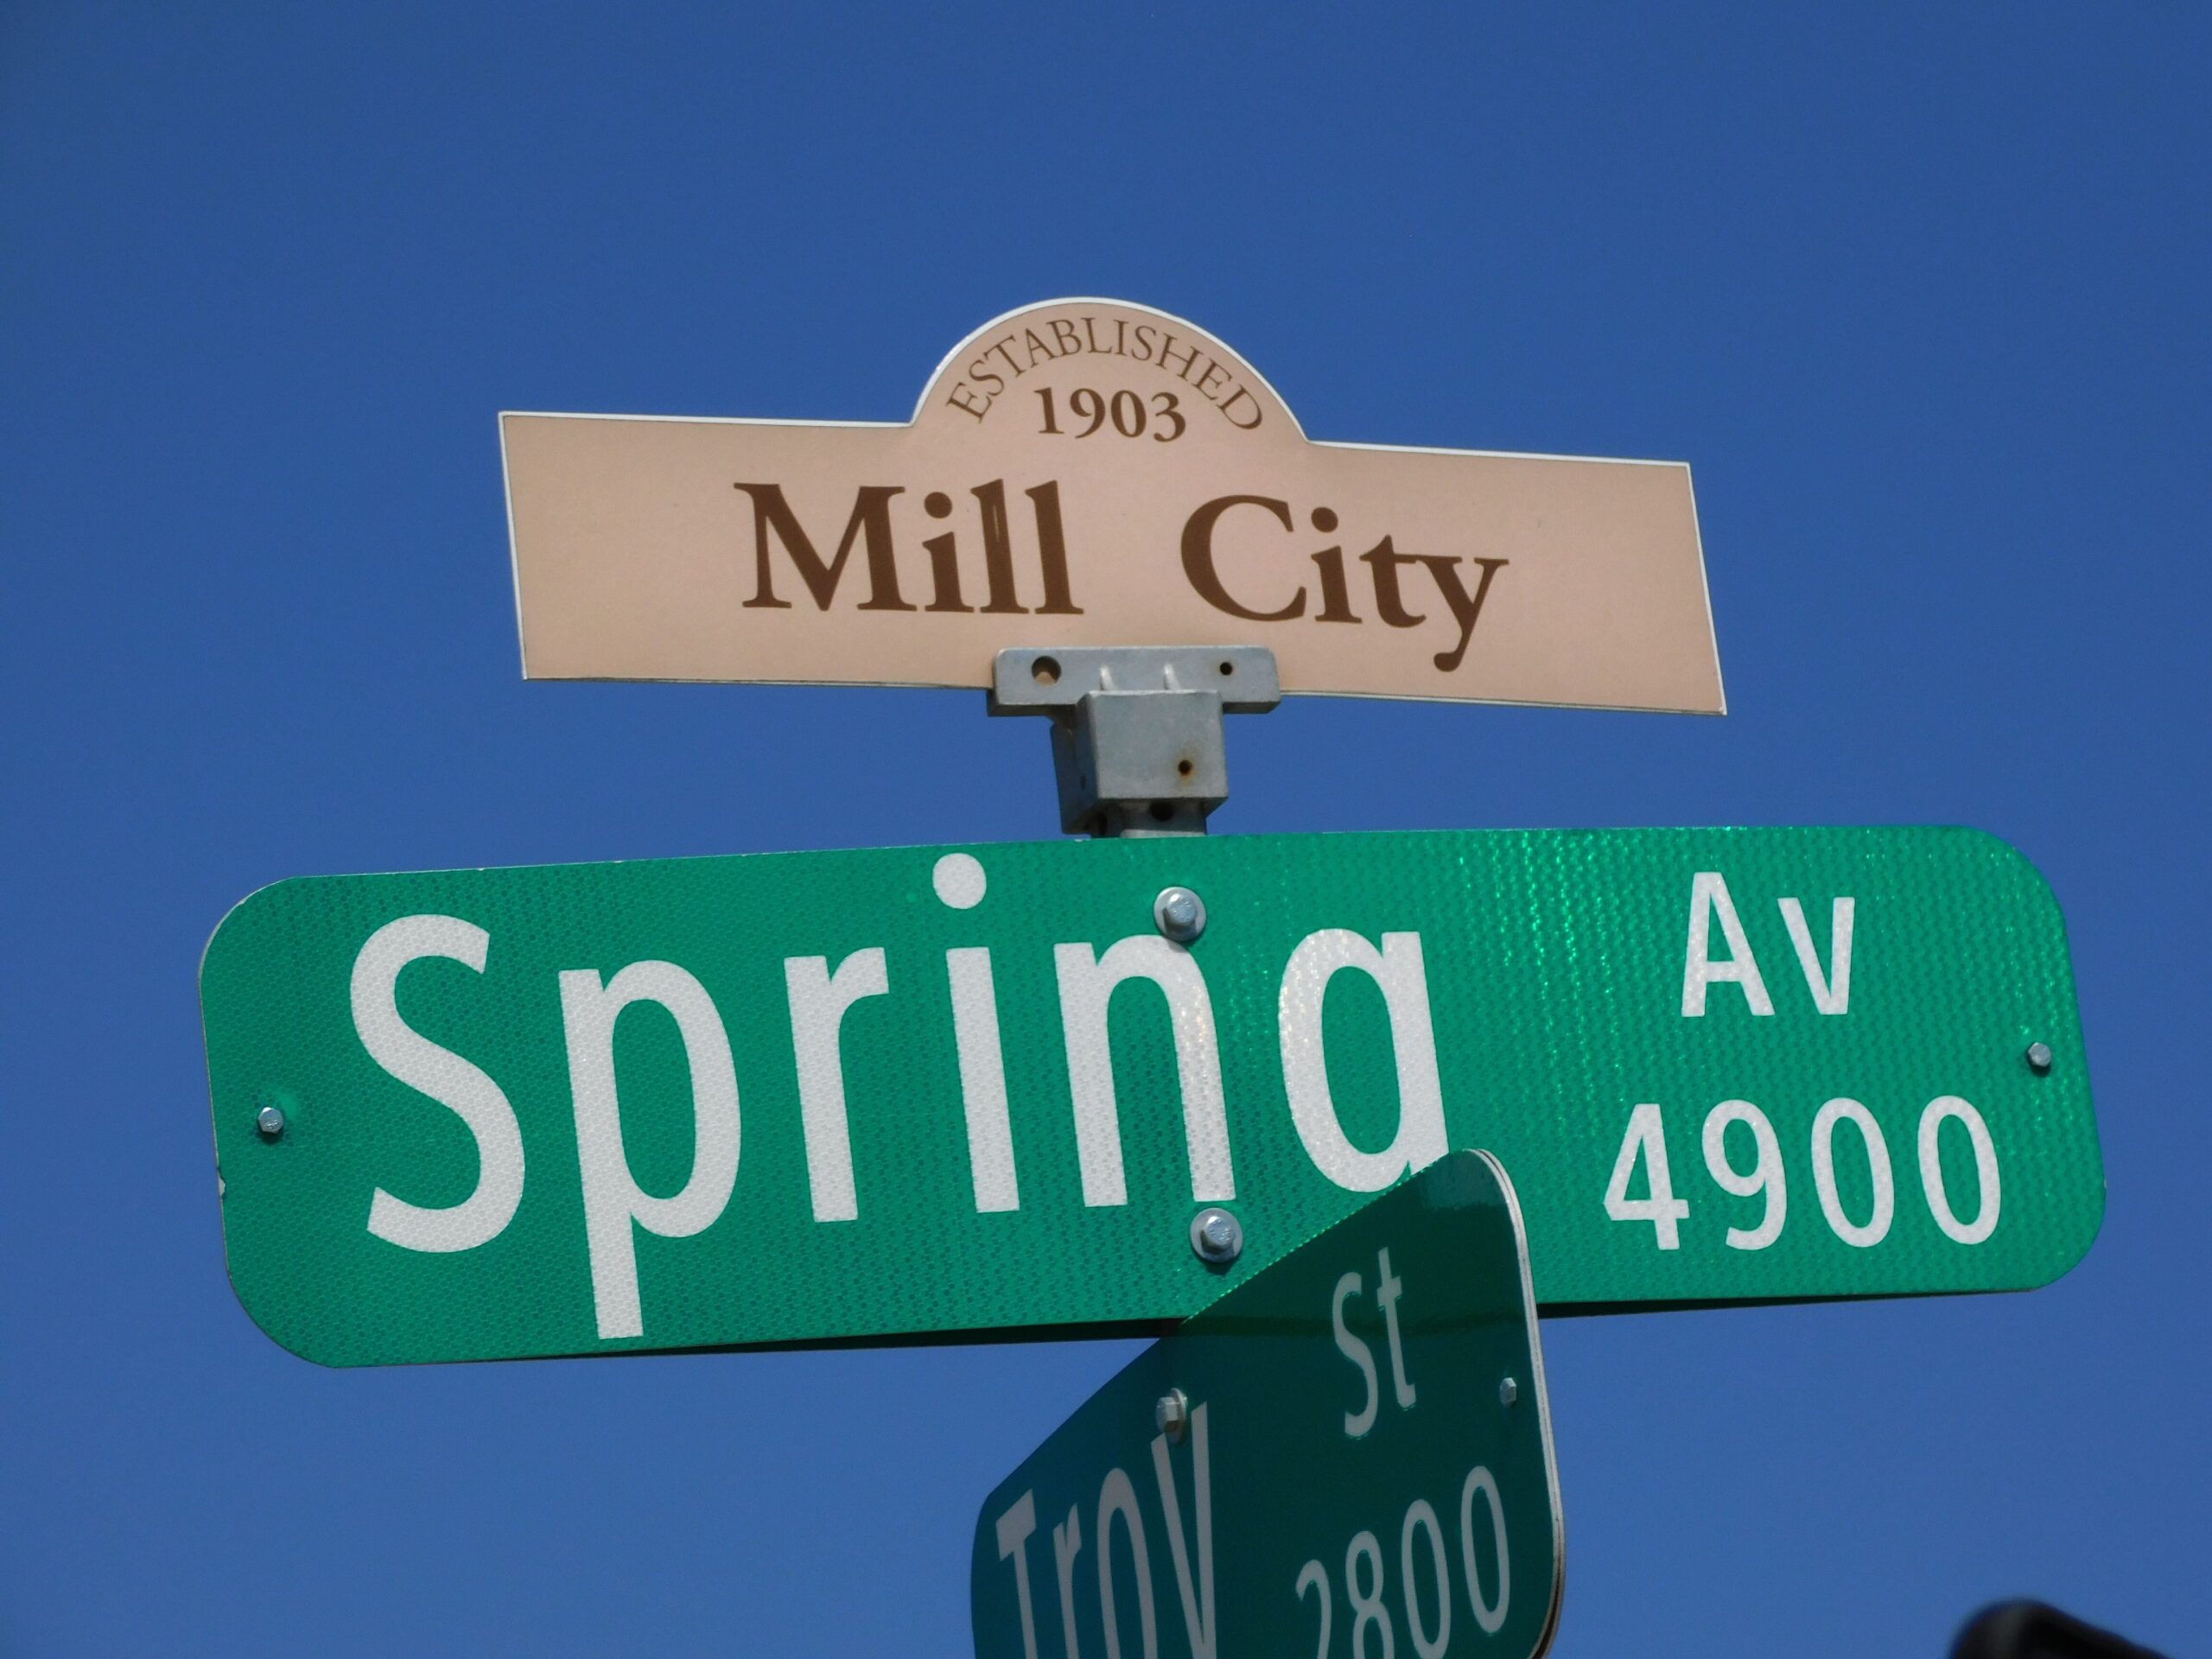 A new public safety project in Mill City may be a solution to the city’s 311 problem